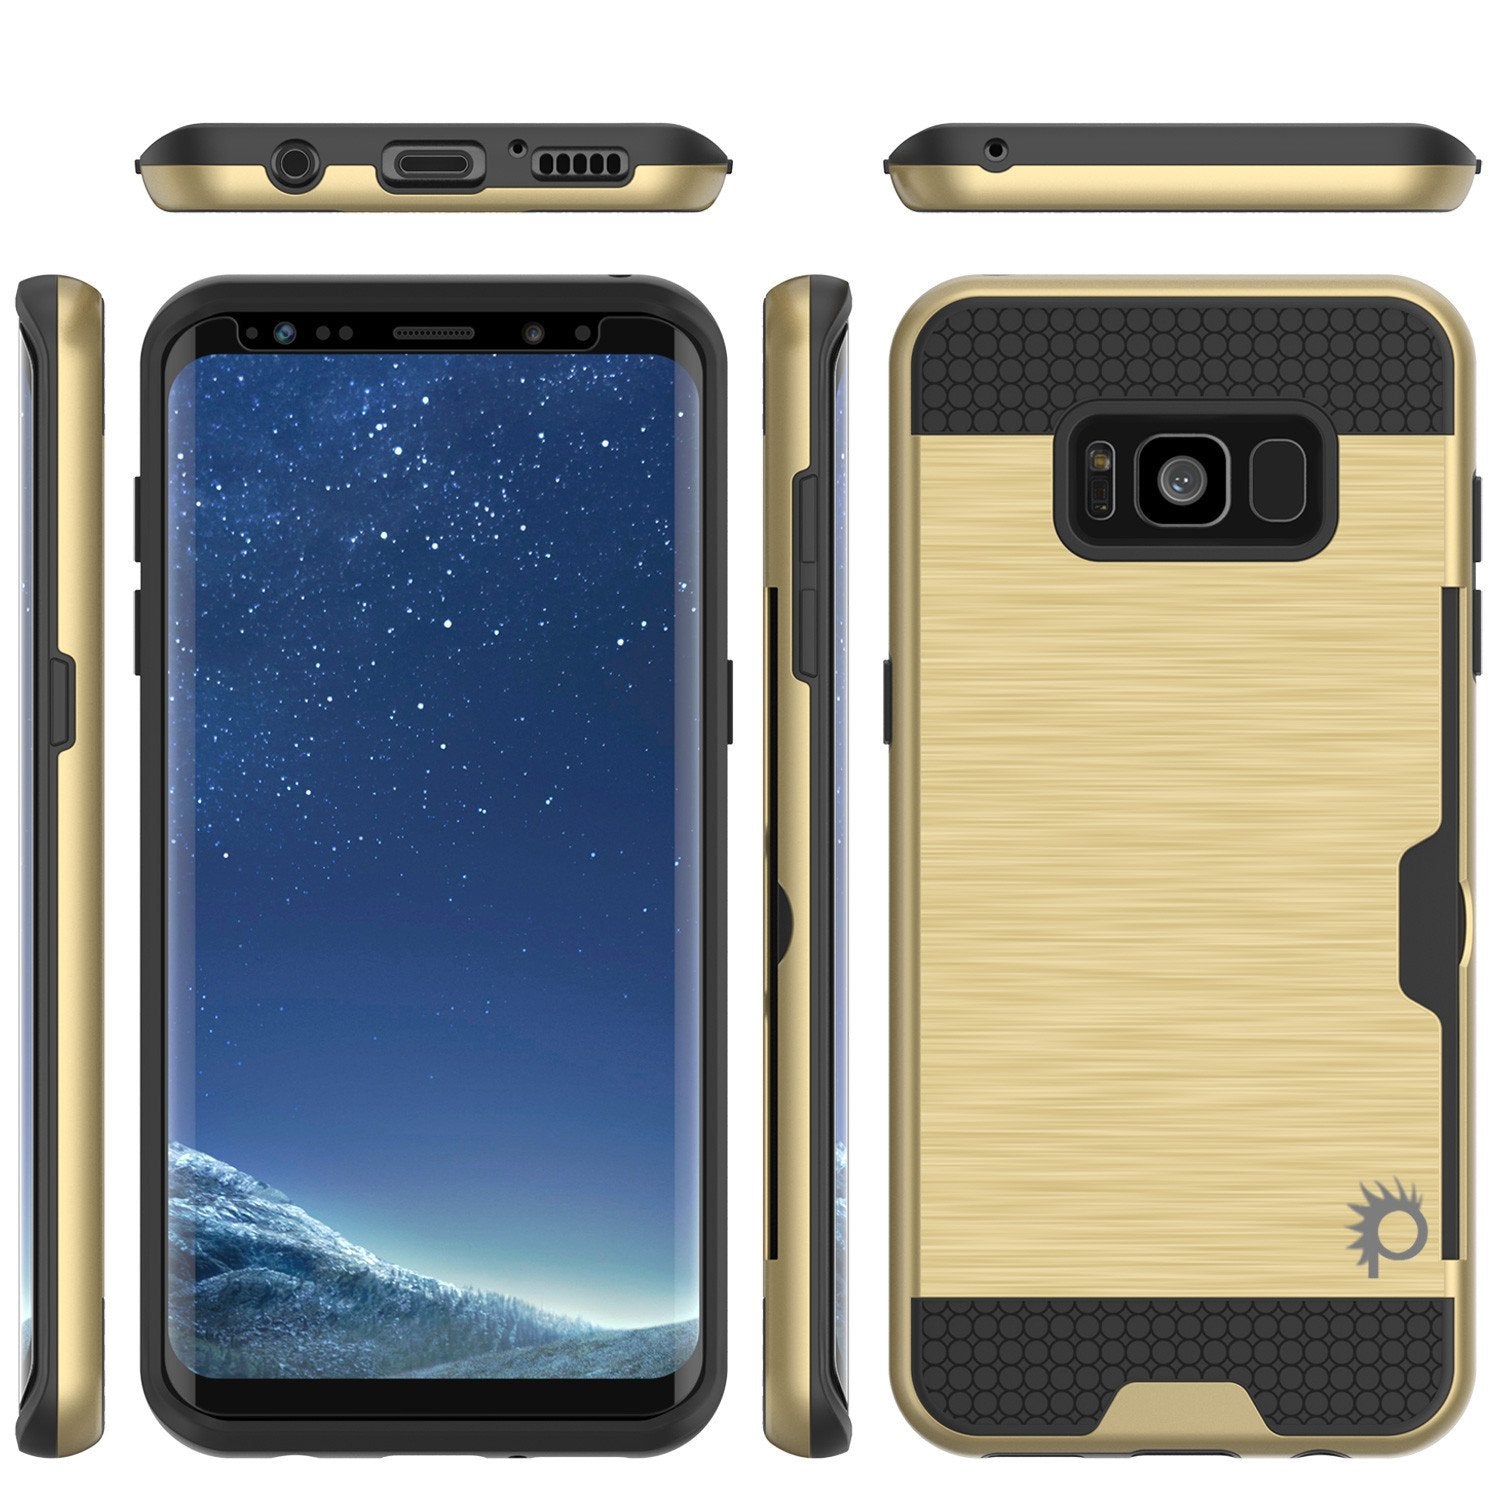 Galaxy S8 Plus Punkcase SLOT Series Dual-Layer Armor Cover, Gold